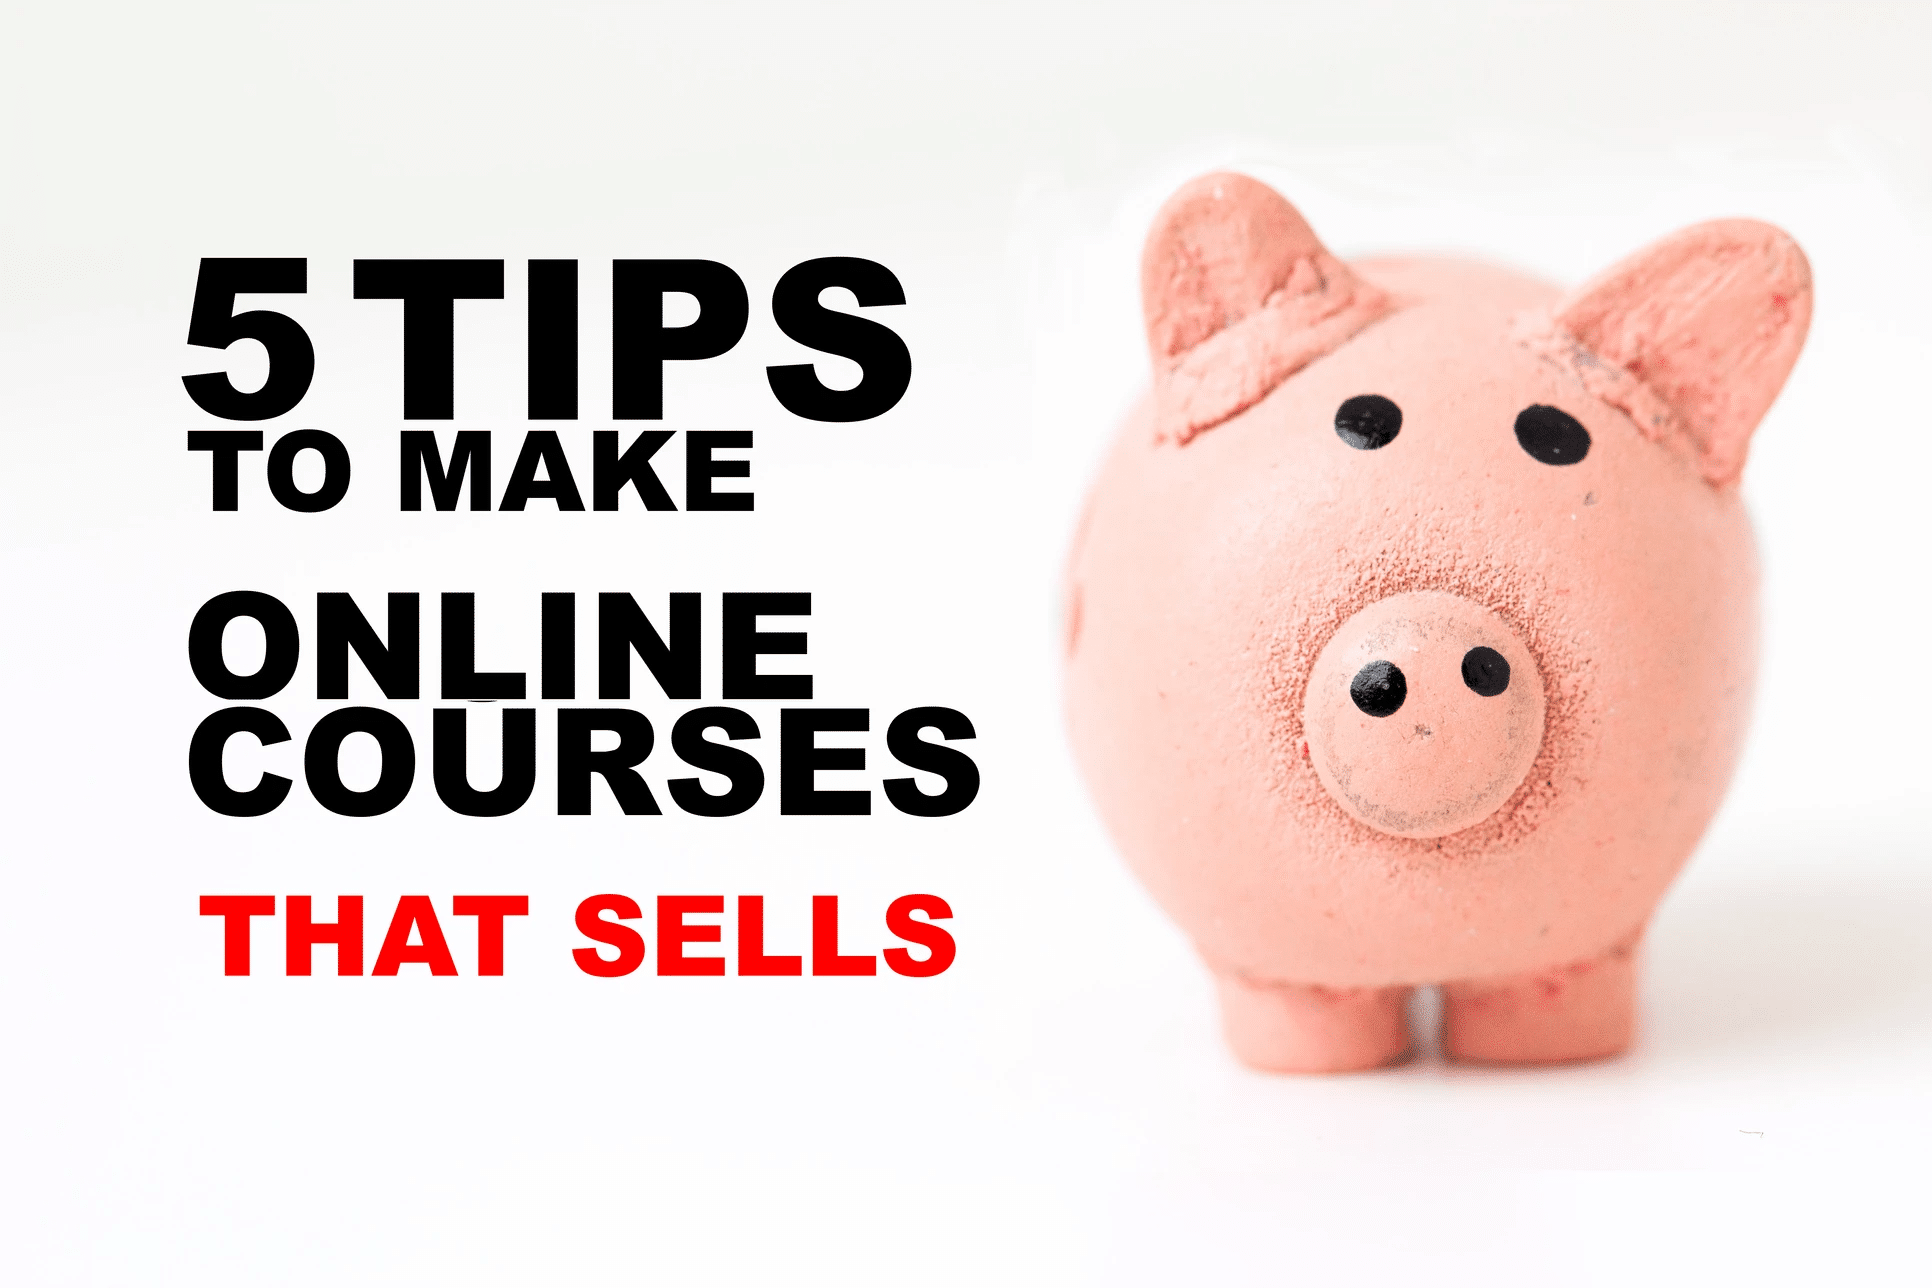 5 Tips to Make Online Courses that Sells